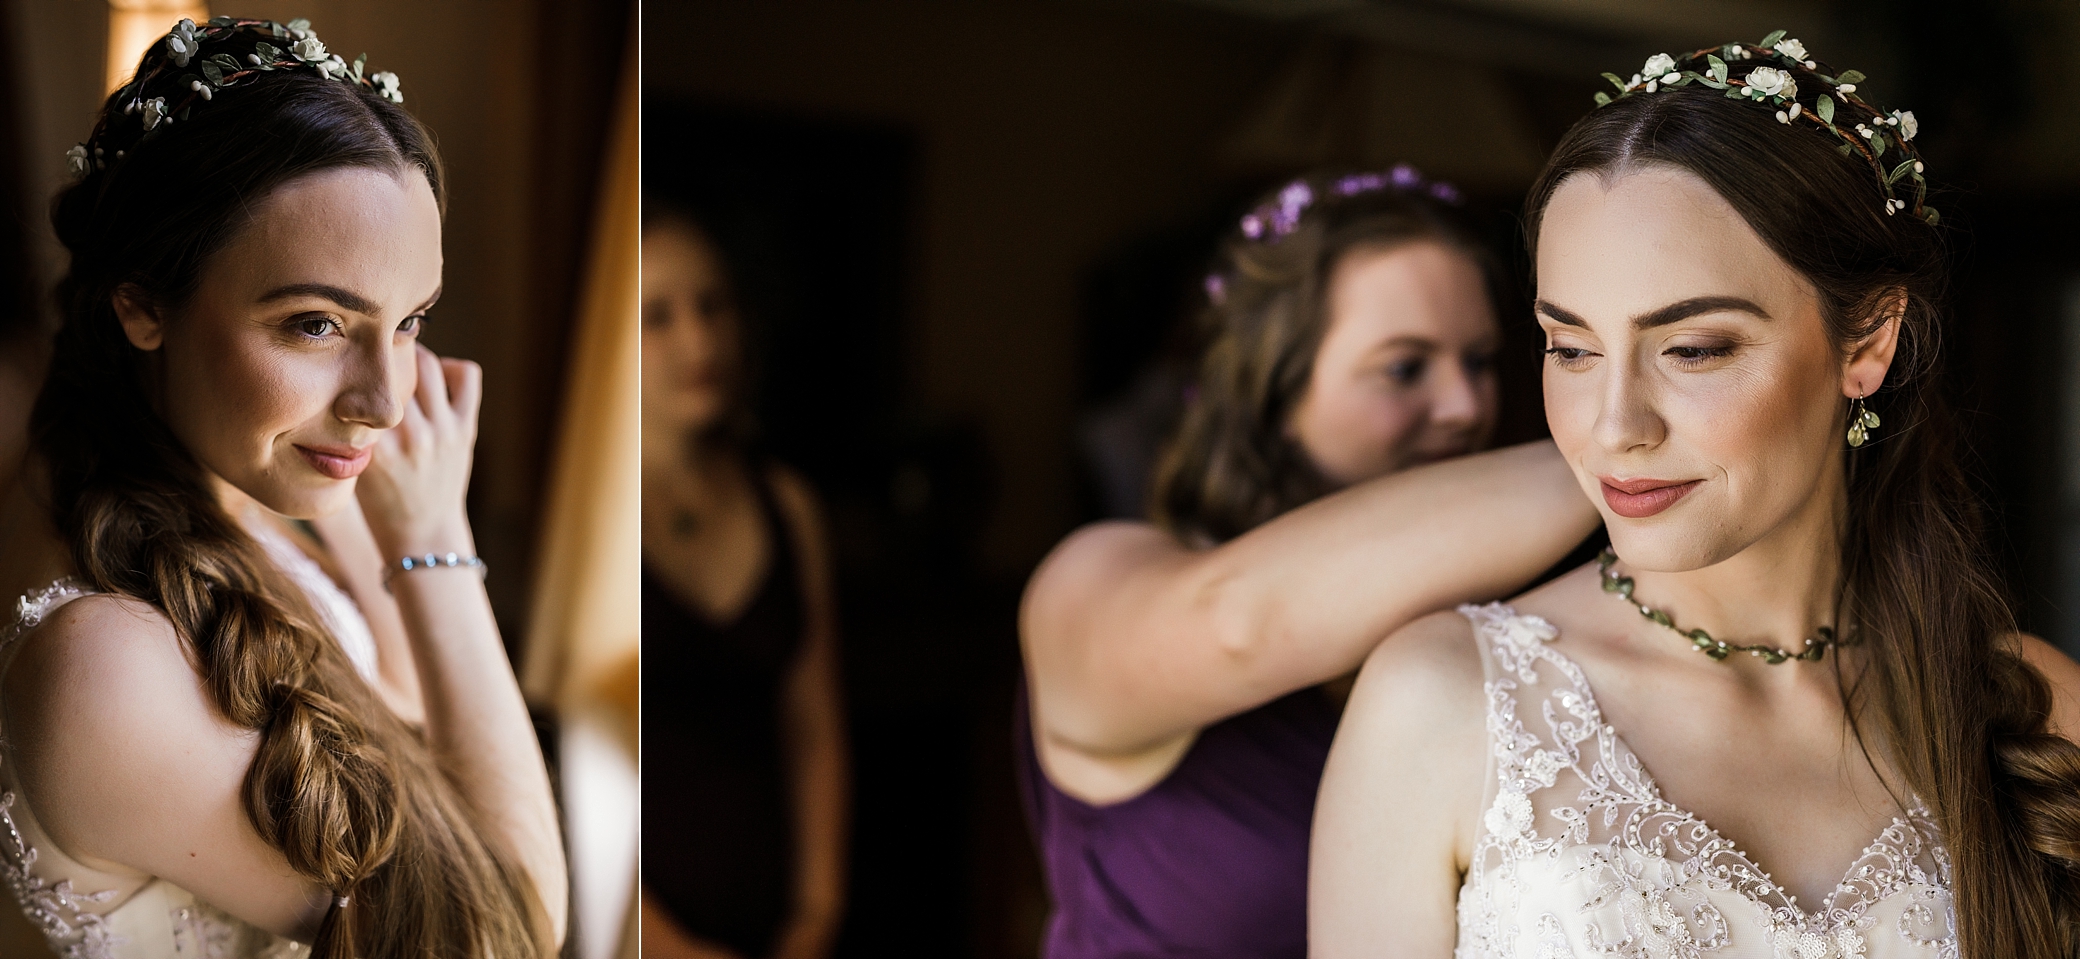 Bride getting ready for wedding at Tacoma's Thornewood Castle with Tacoma Wedding Photographer, Megan Montalvo Photography